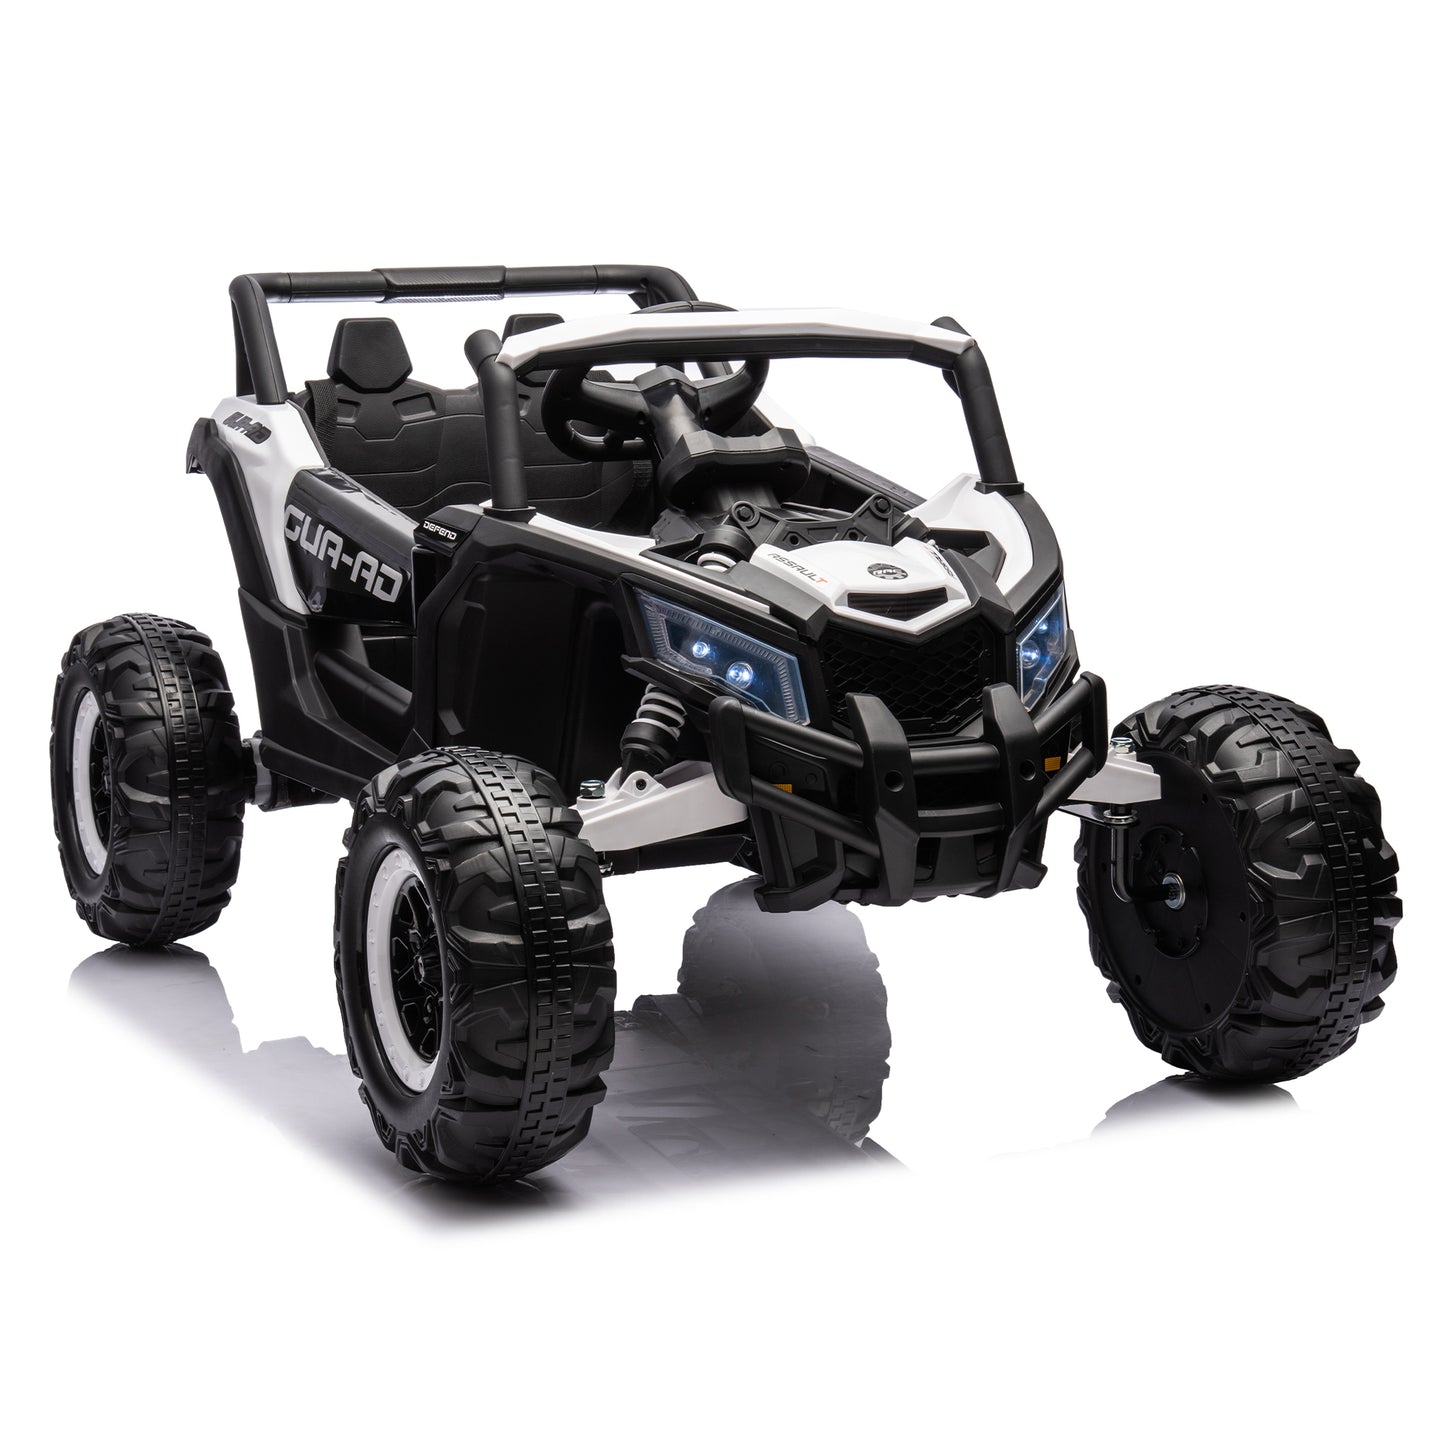 12V Ride On Car with Remote Control,UTV ride on for kid,3-Point Safety Harness, Music Player (USB Port/Volume Knob/Battery Indicator), LED Lights, High-Low Speed Switch - Off-Road Adventure for Kids